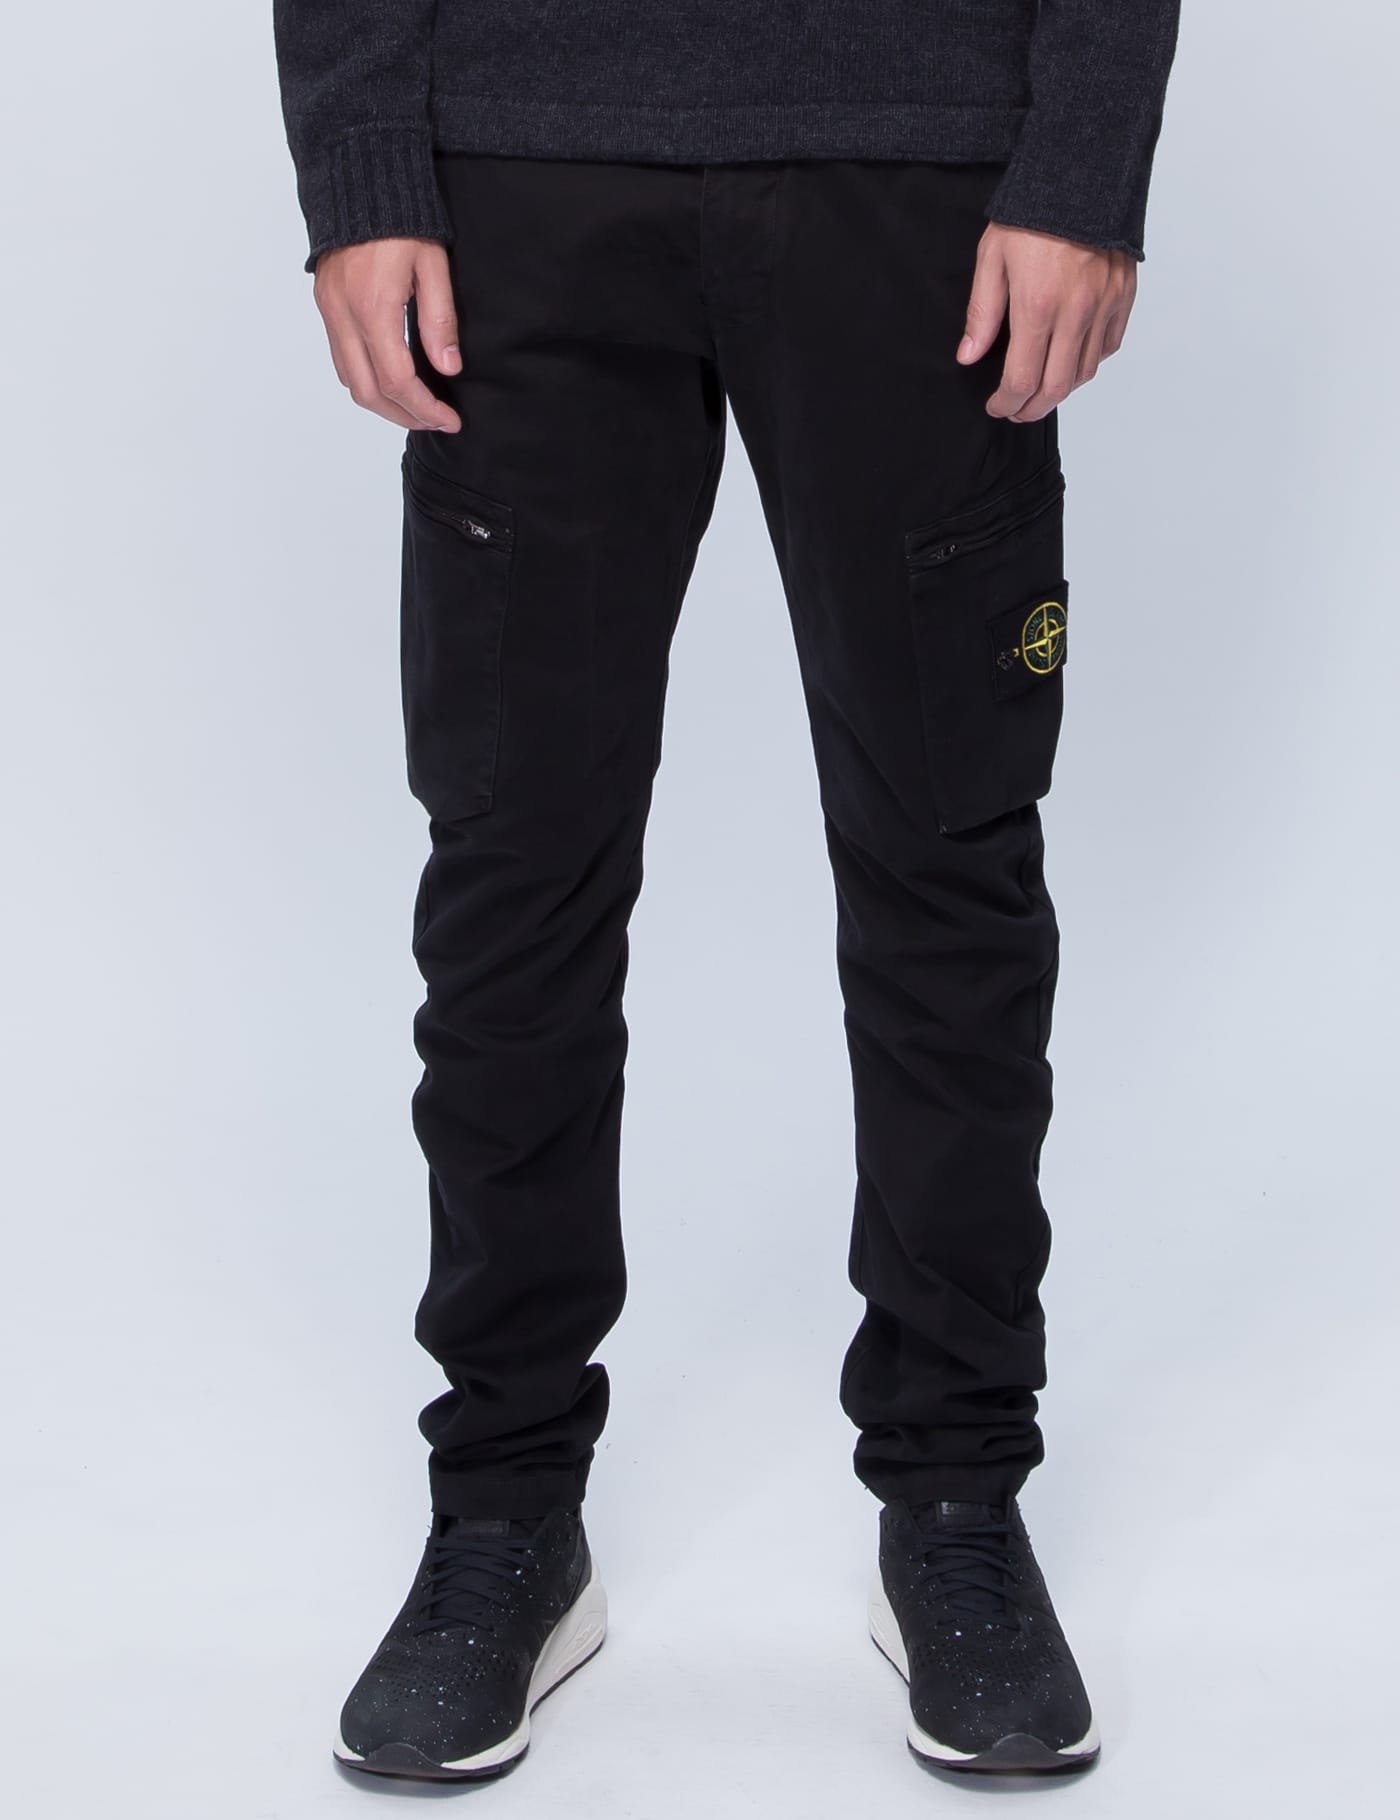 Men's STONE ISLAND Pants Sale, Up To 70% Off | ModeSens